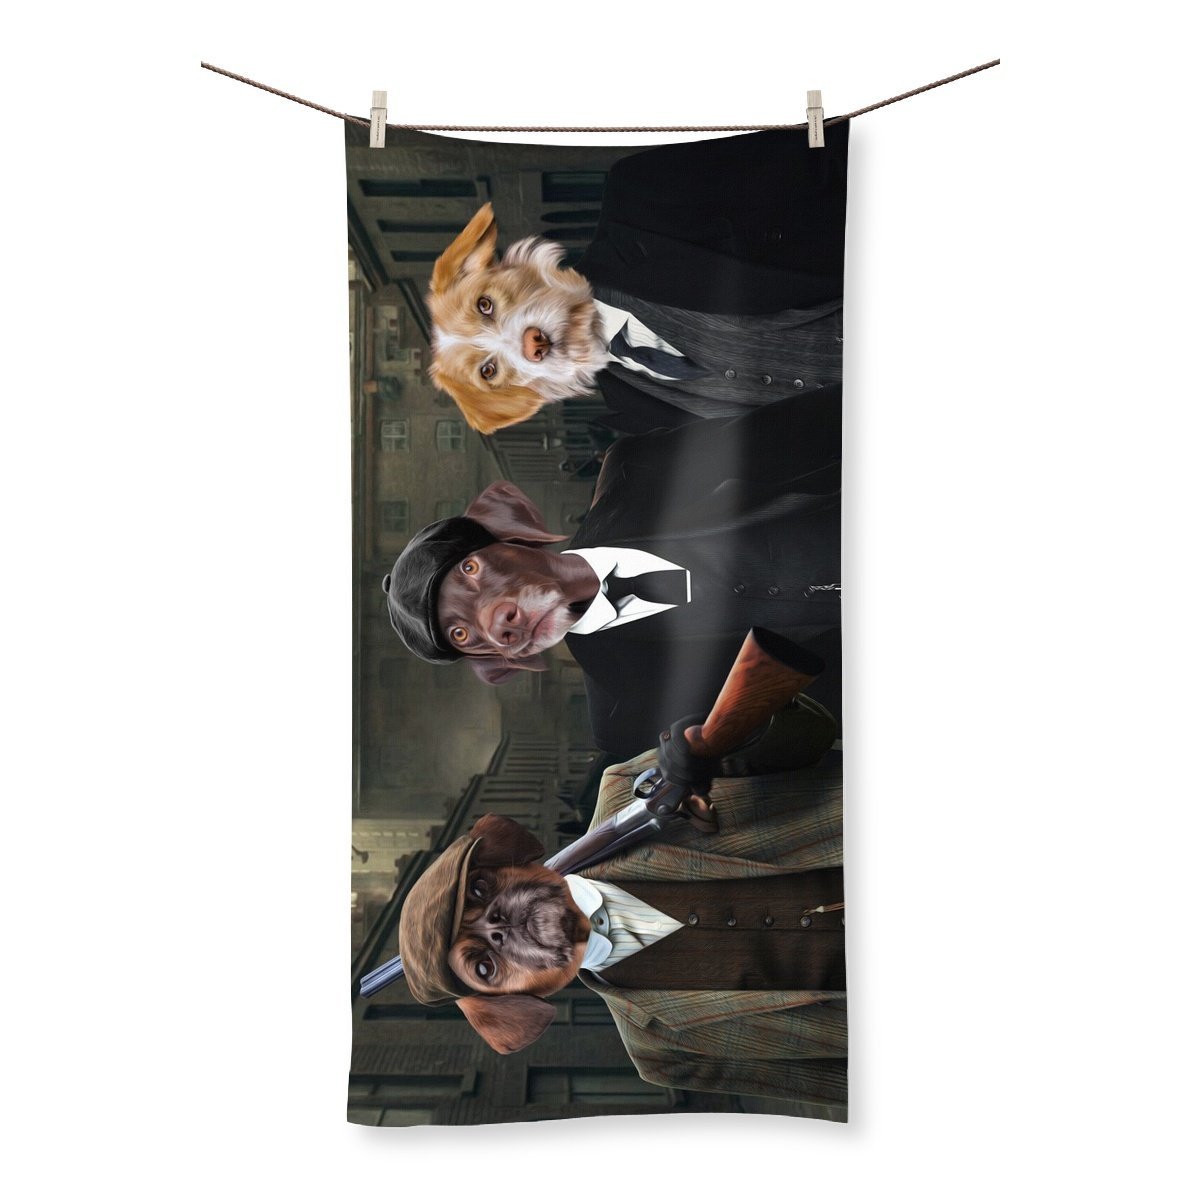 The 3 Brothers (Peaky Blinders Inspired): Custom Pet Towel - Paw & Glory - #pet portraits# - #dog portraits# - #pet portraits uk#Paw & Glory, paw and glory, pet portraits, pet portrait admiral, custom dog painting, small dog portrait, pictures for pets, dog astronaut photo, pet portrait,custom pet portrait Towel